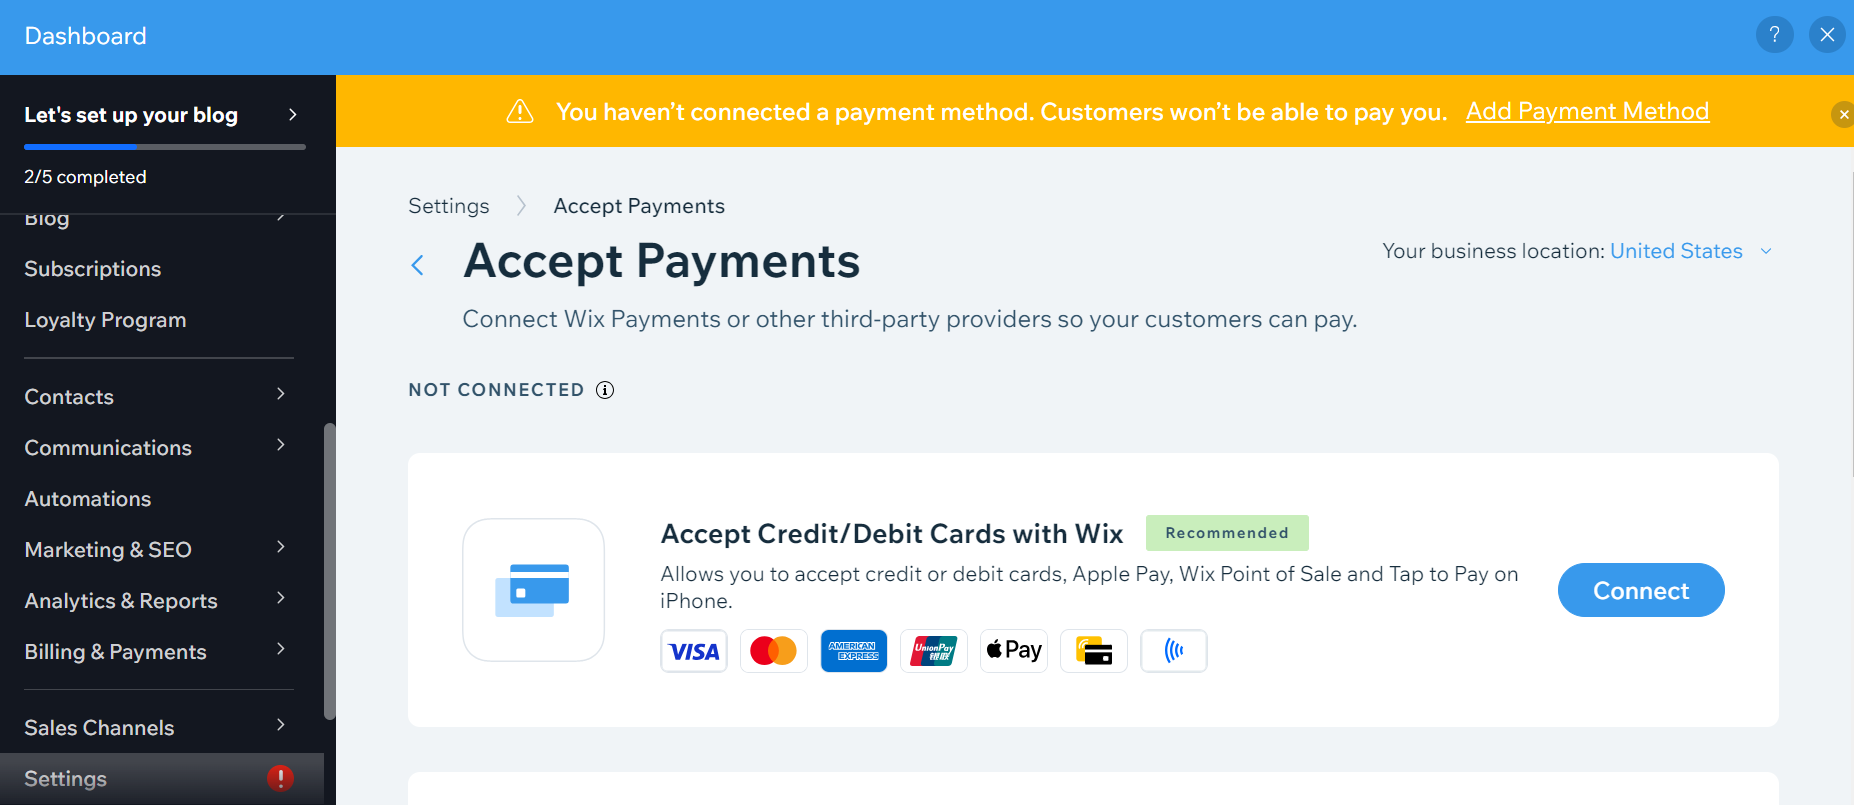 Connect Payment Methods